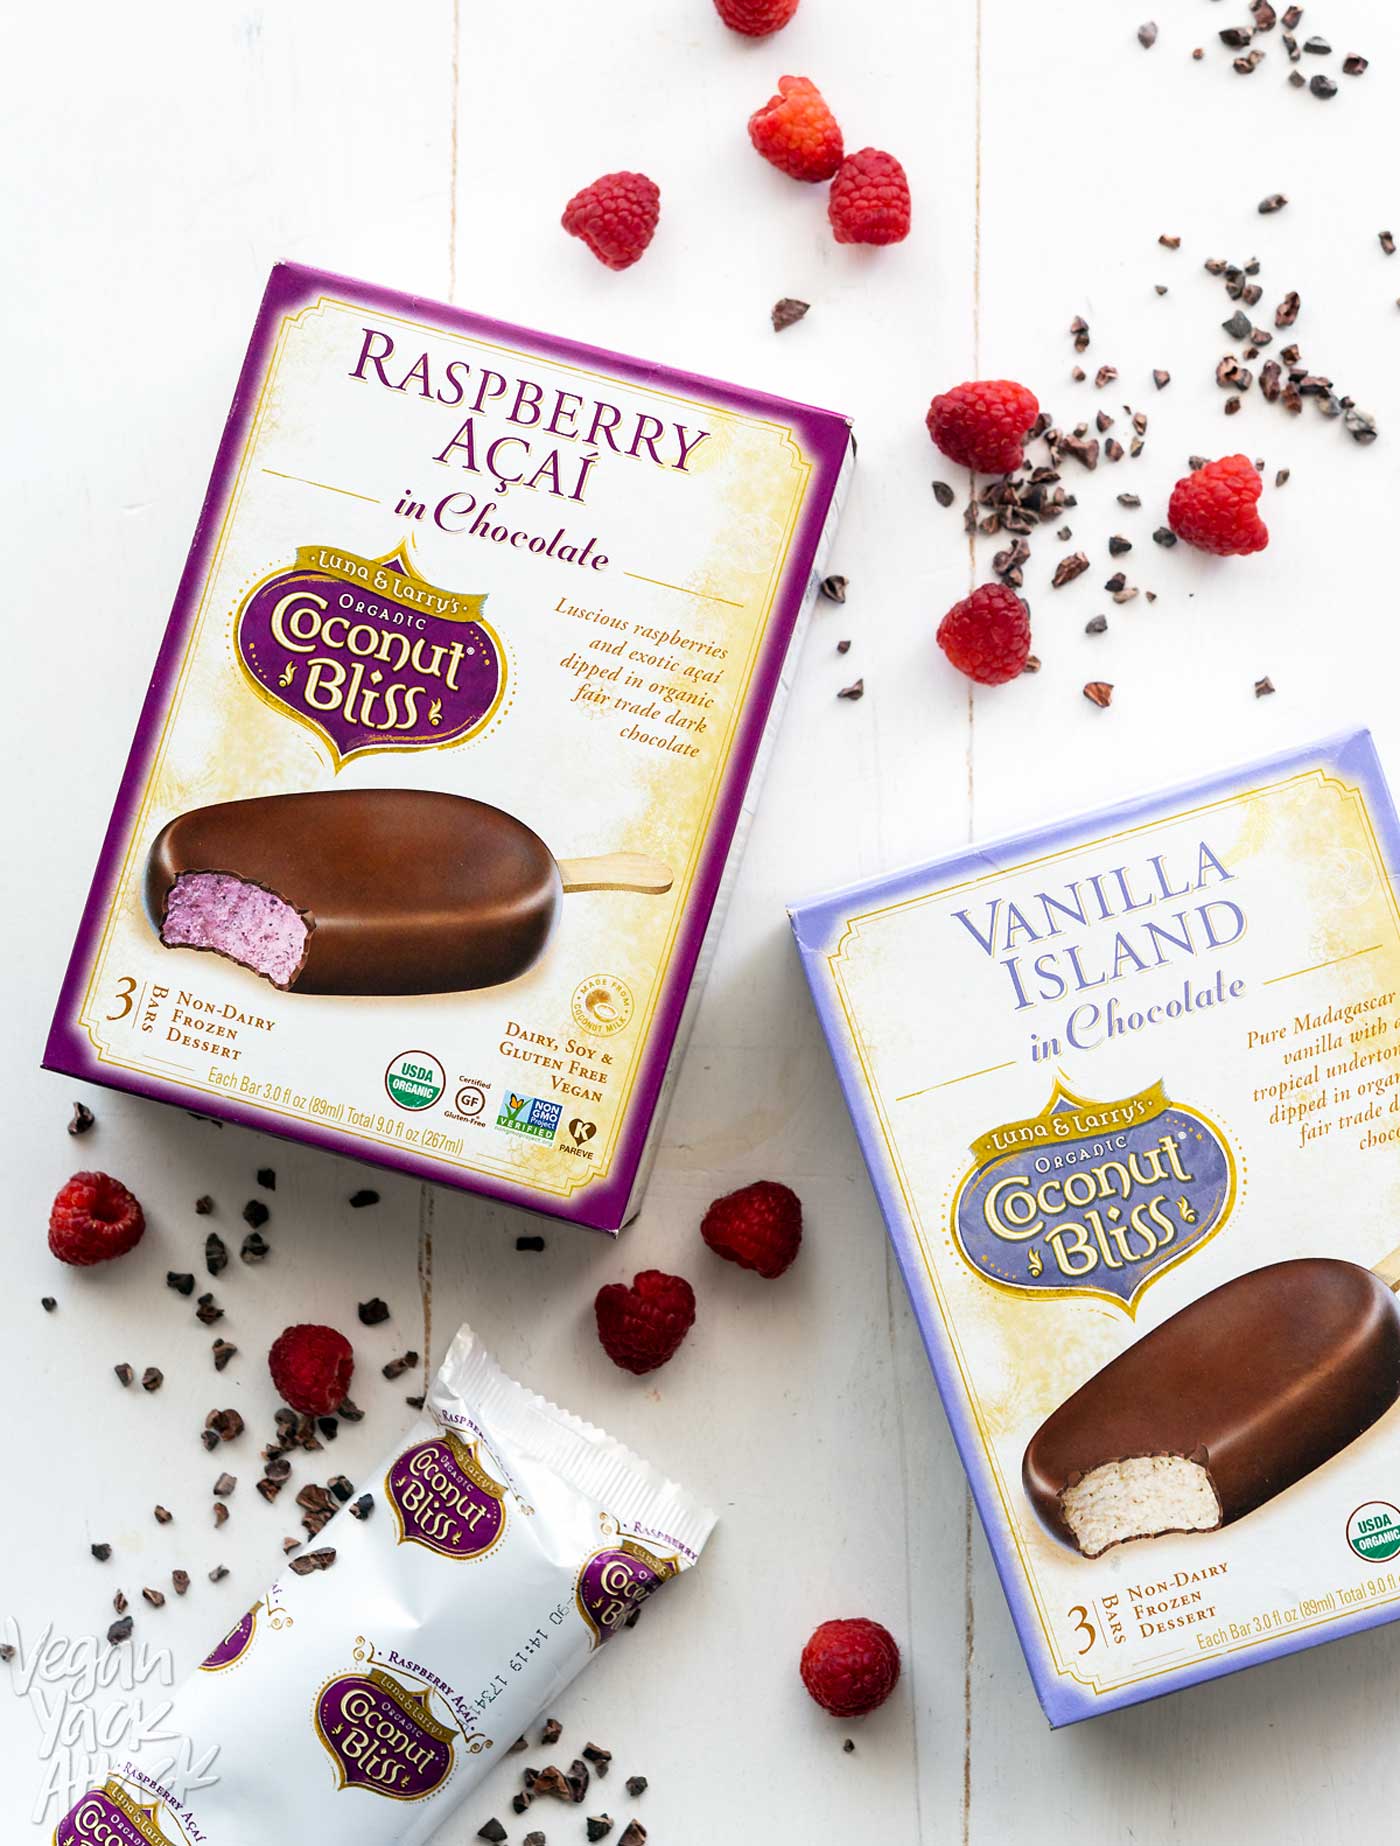 Summer is such a bright and happy season, let's have another reason to look forward to it with these Raspberry Acai Chocolate Bars! Here are three ways to make the best of both. #vegan #soyfree #dairyfree #glutenfree